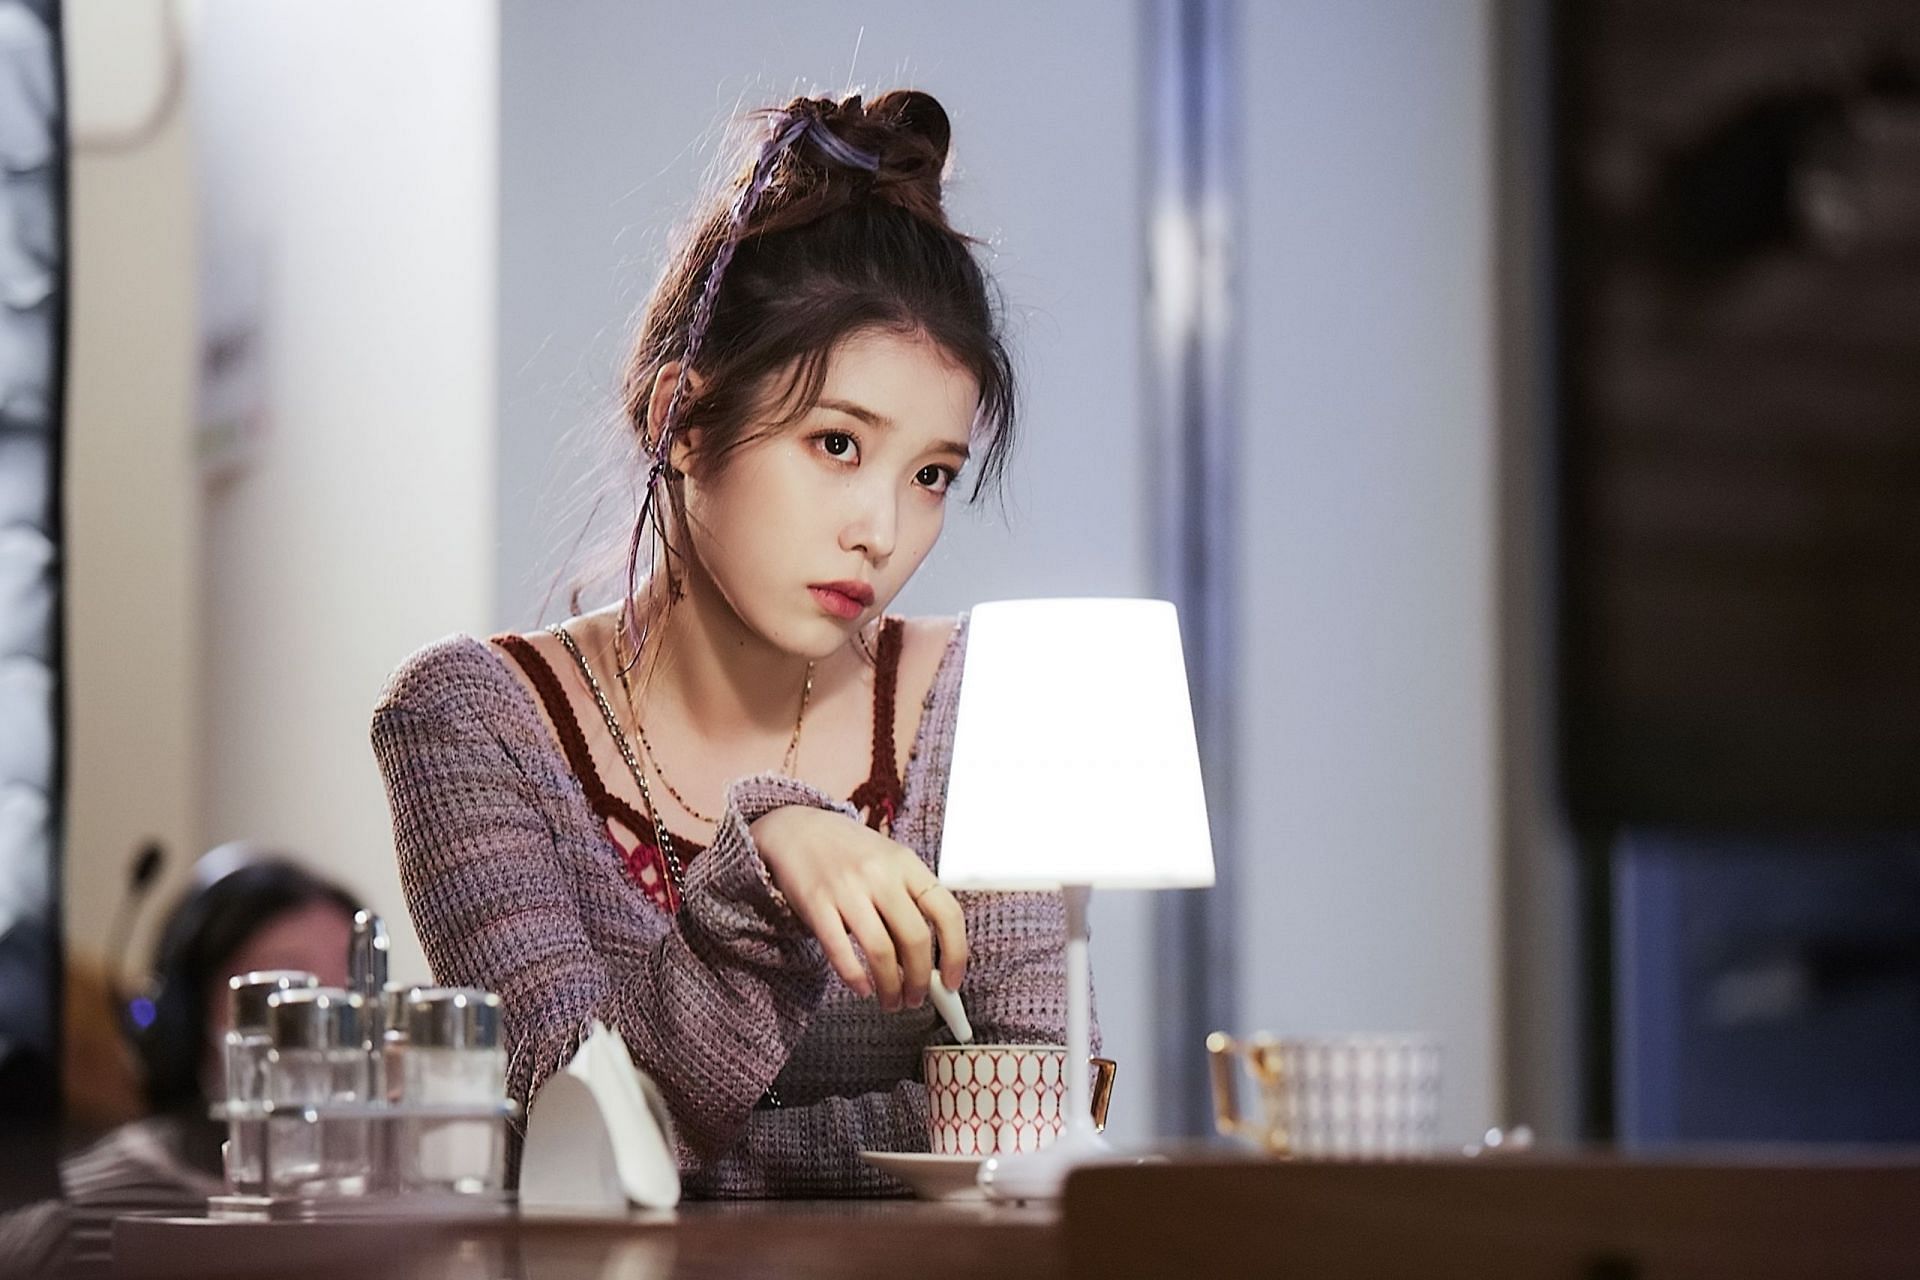 IU turns 29 years old on May 16 (Image via @_IUofficial/ Twitter)